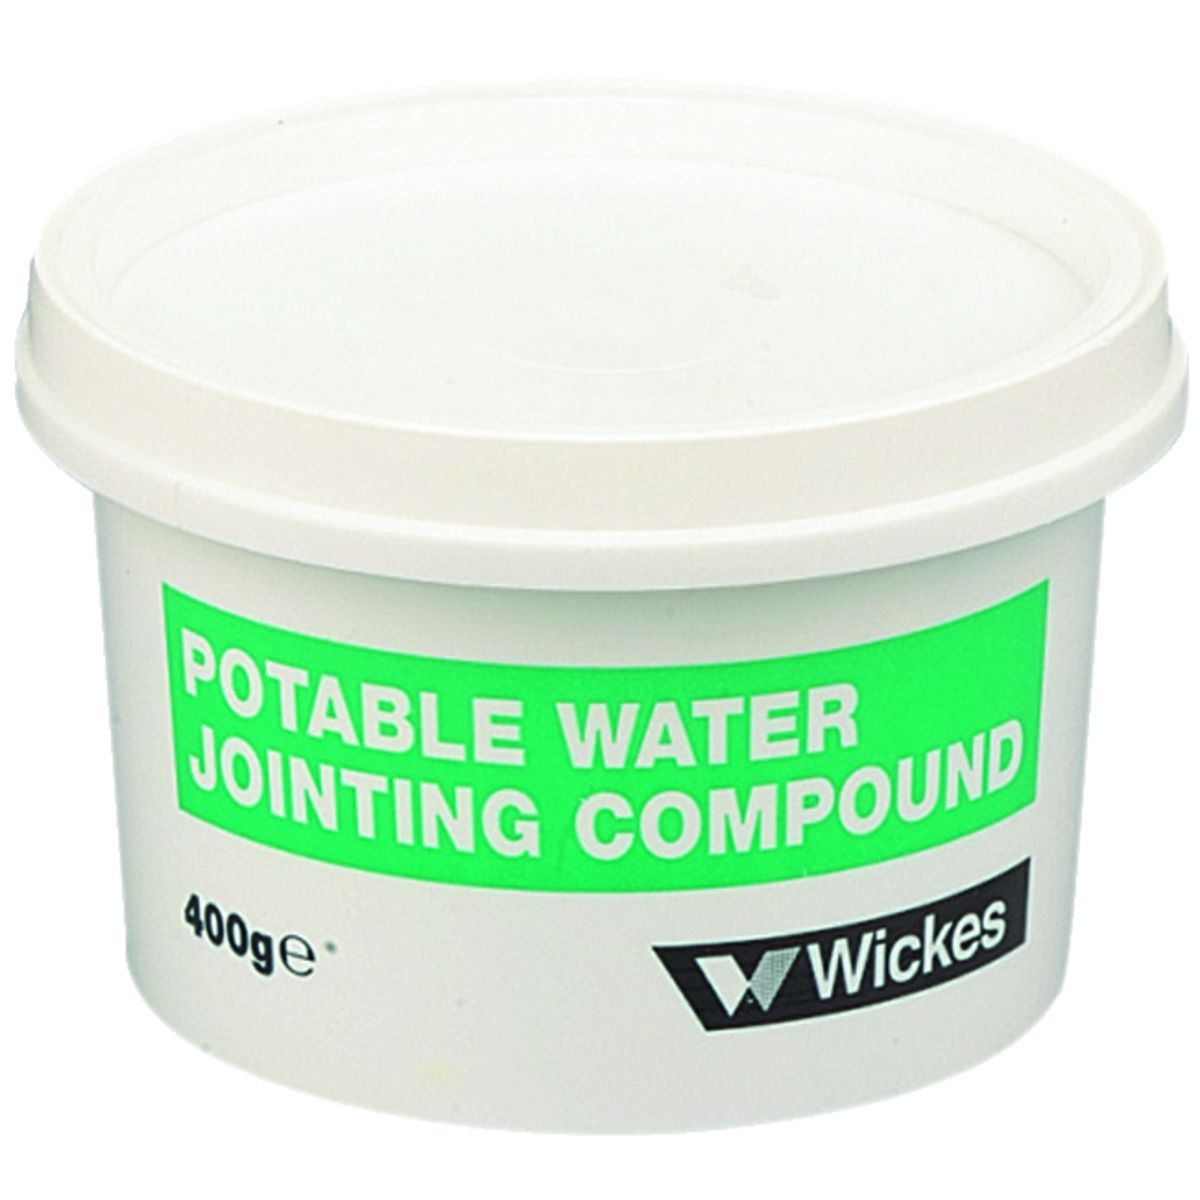 Wickes Potable Water System Jointing Compound - 400g